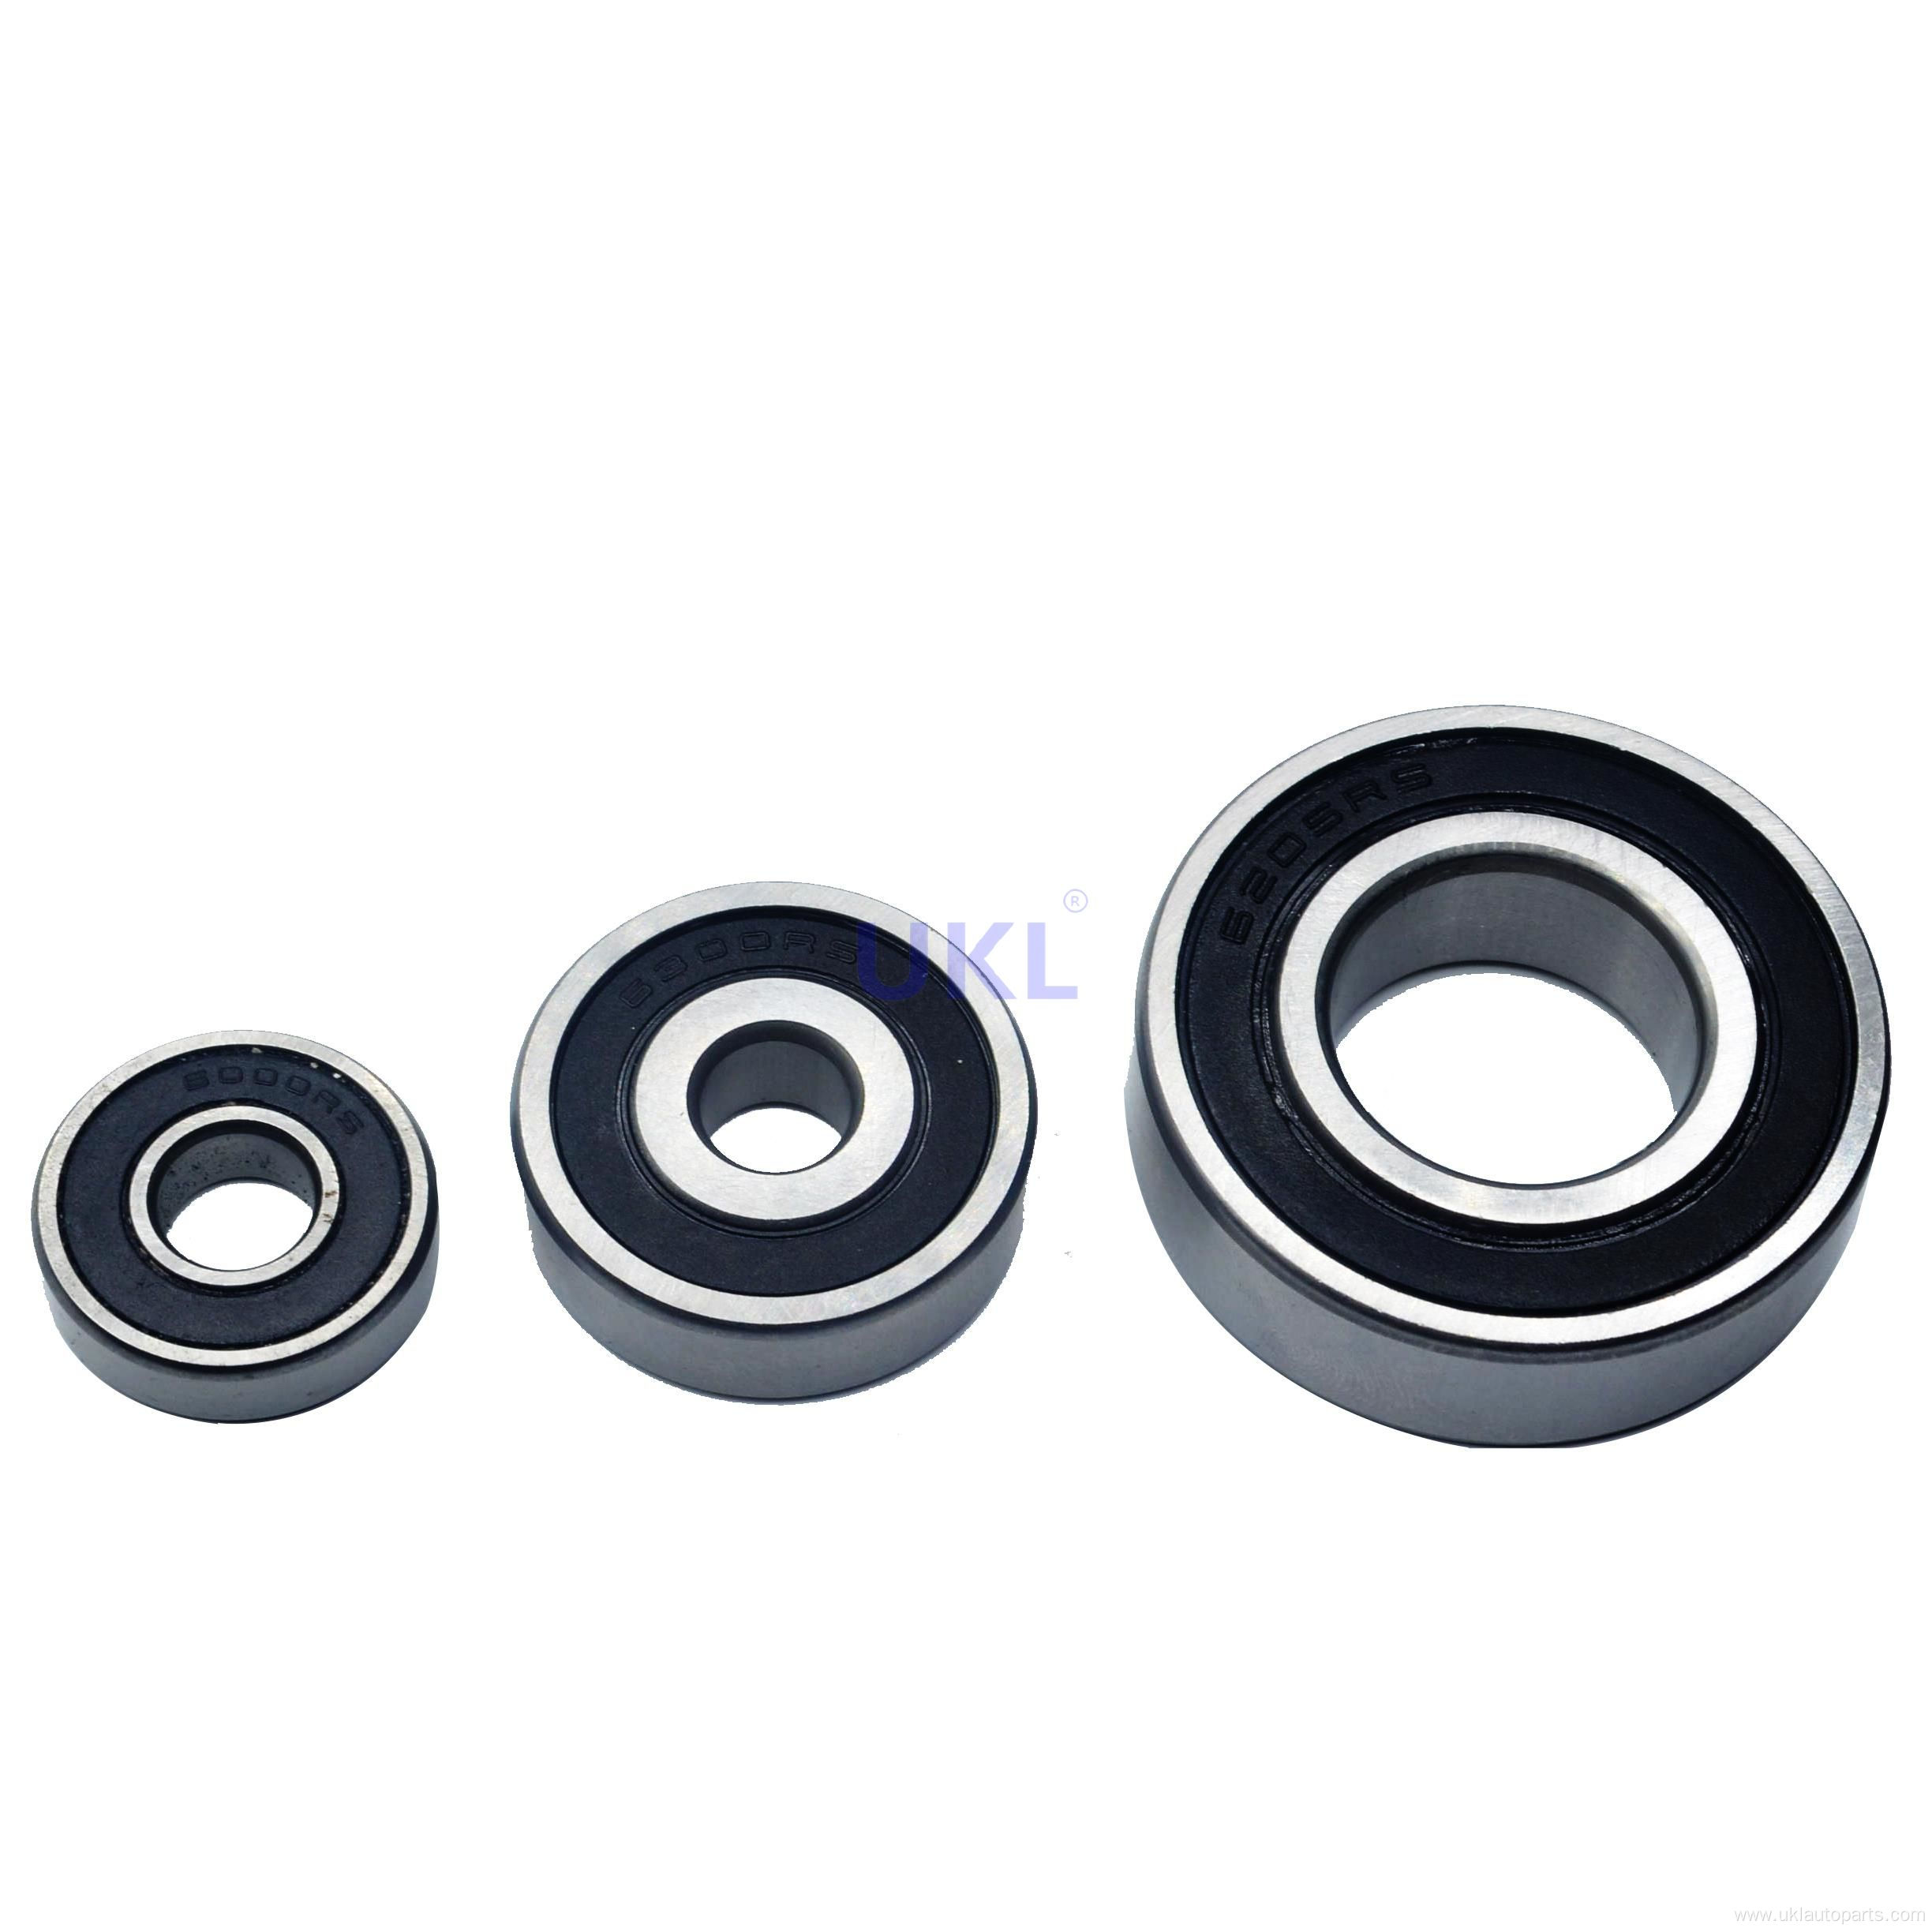 Excellent Home Use Retail Deep Groove Ball Bearing